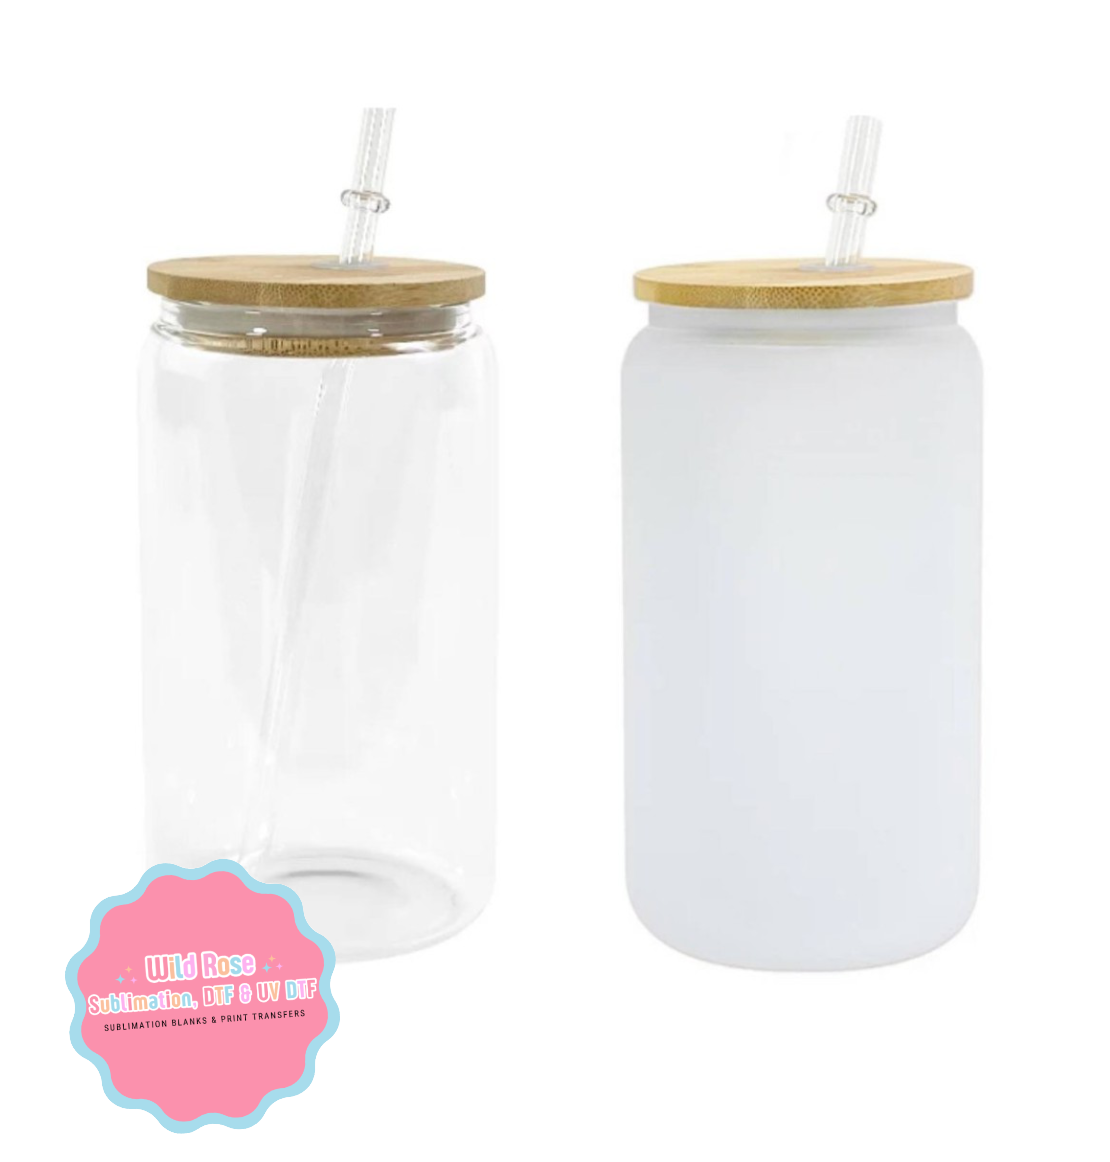 16oz Glass Cans With Bamboo Lids